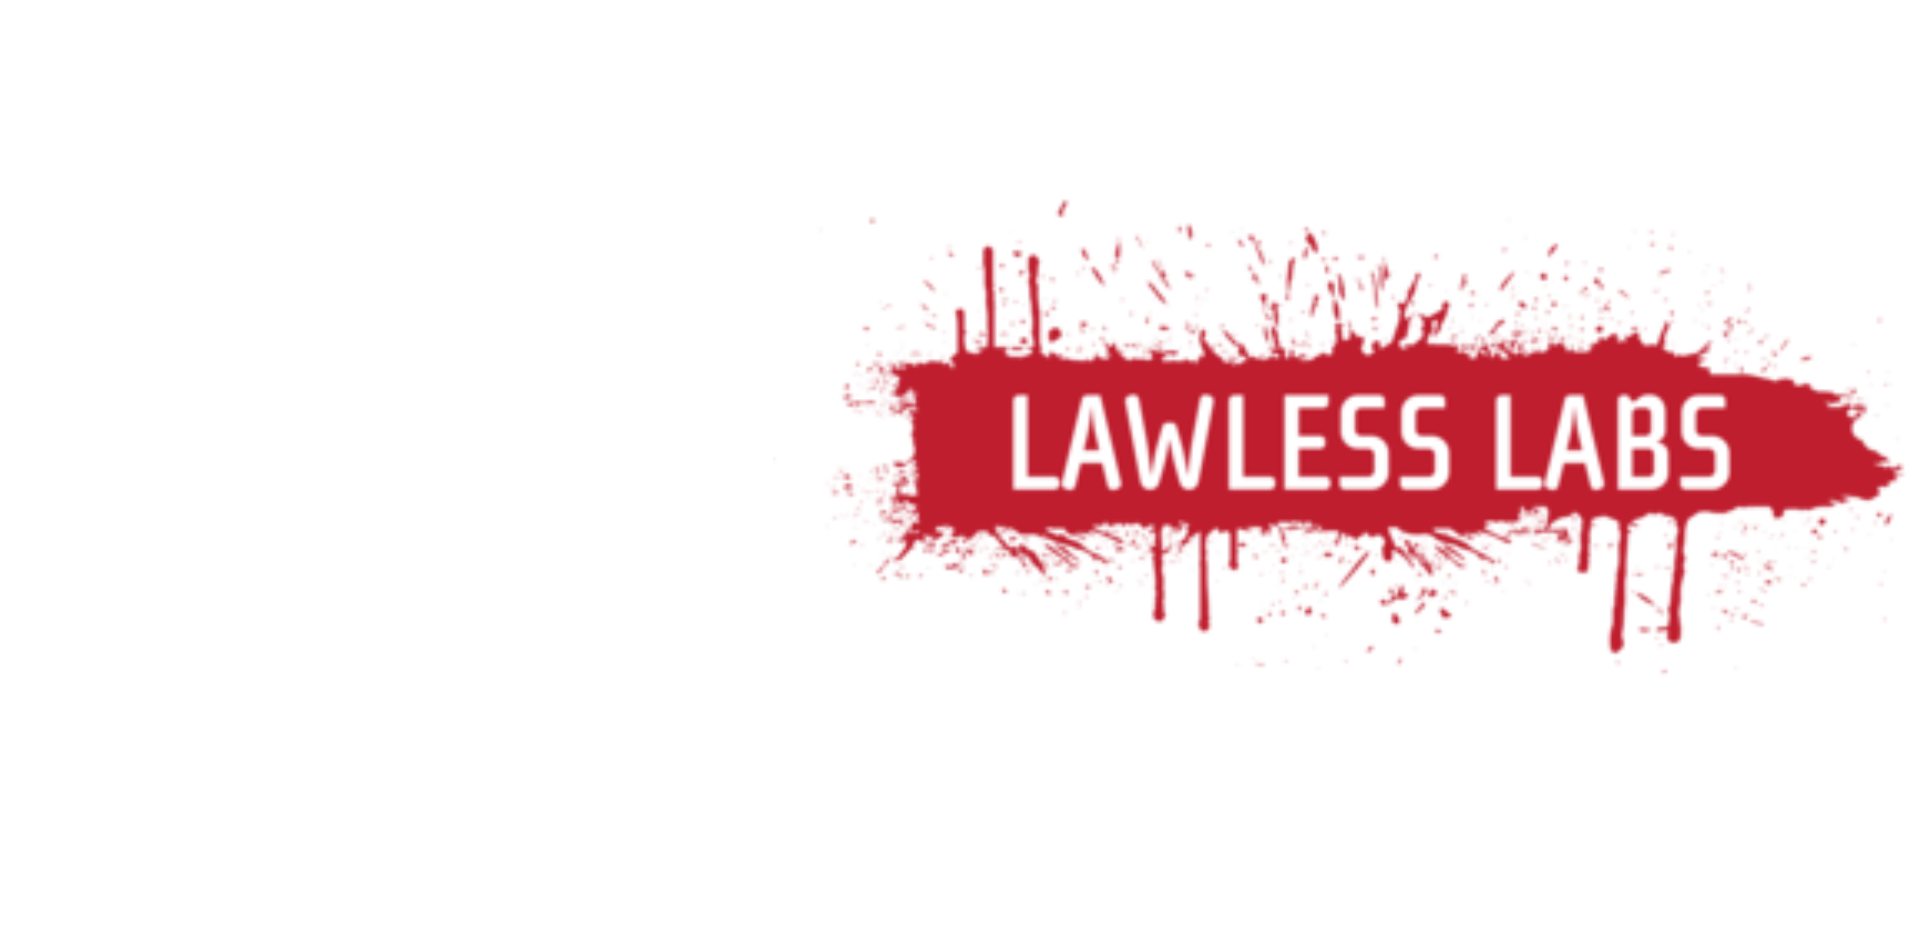 Lawless labs